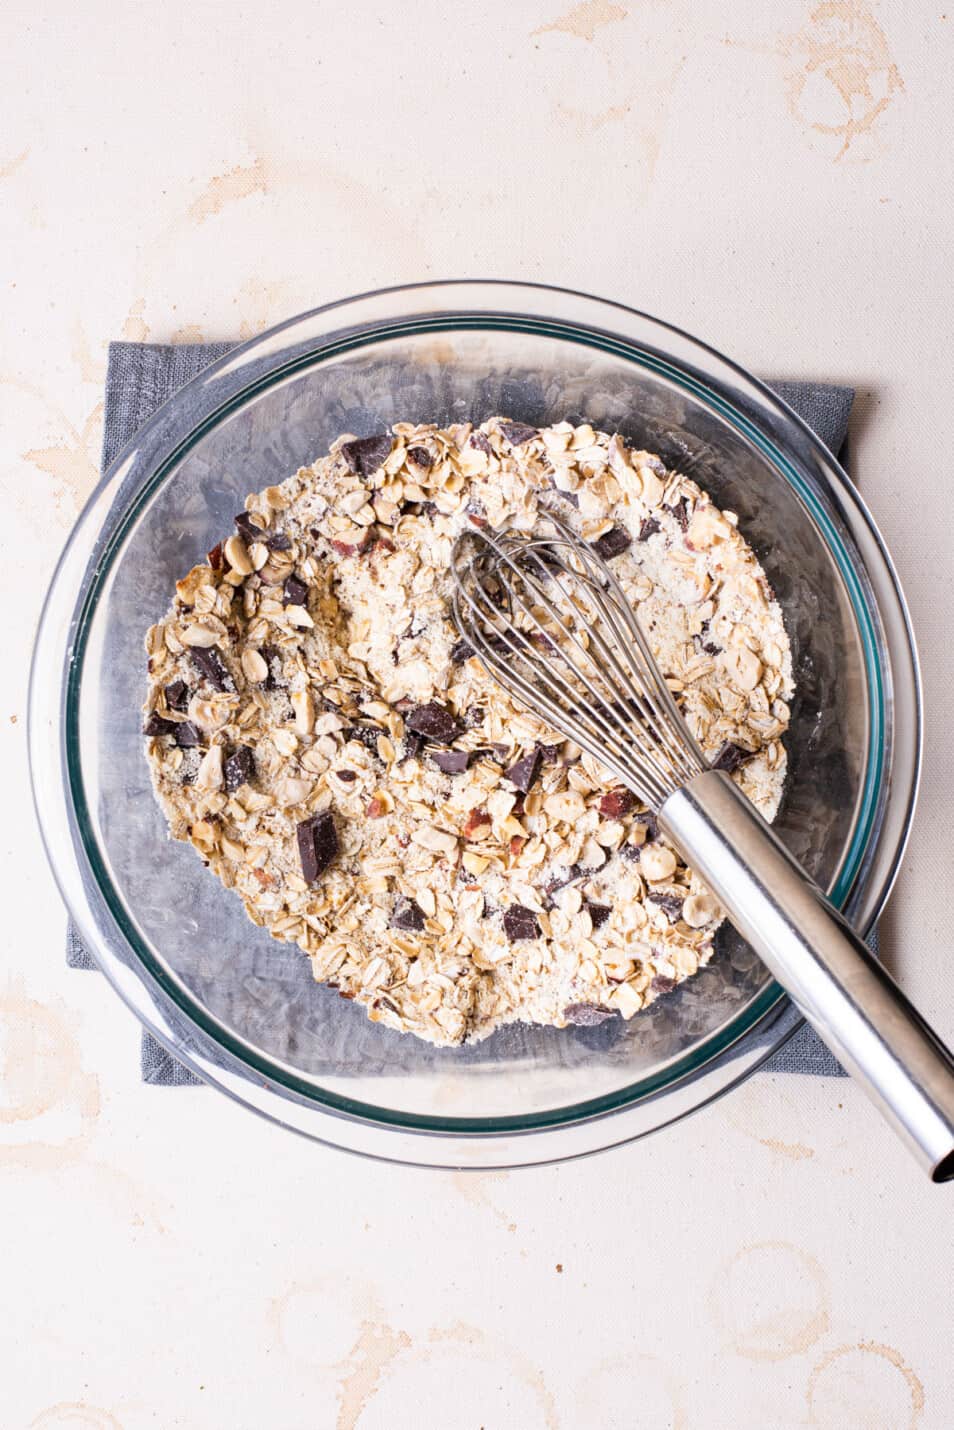 Oats, almond flour, chocolate chunks, and hazelnuts whisked together in a bowl.